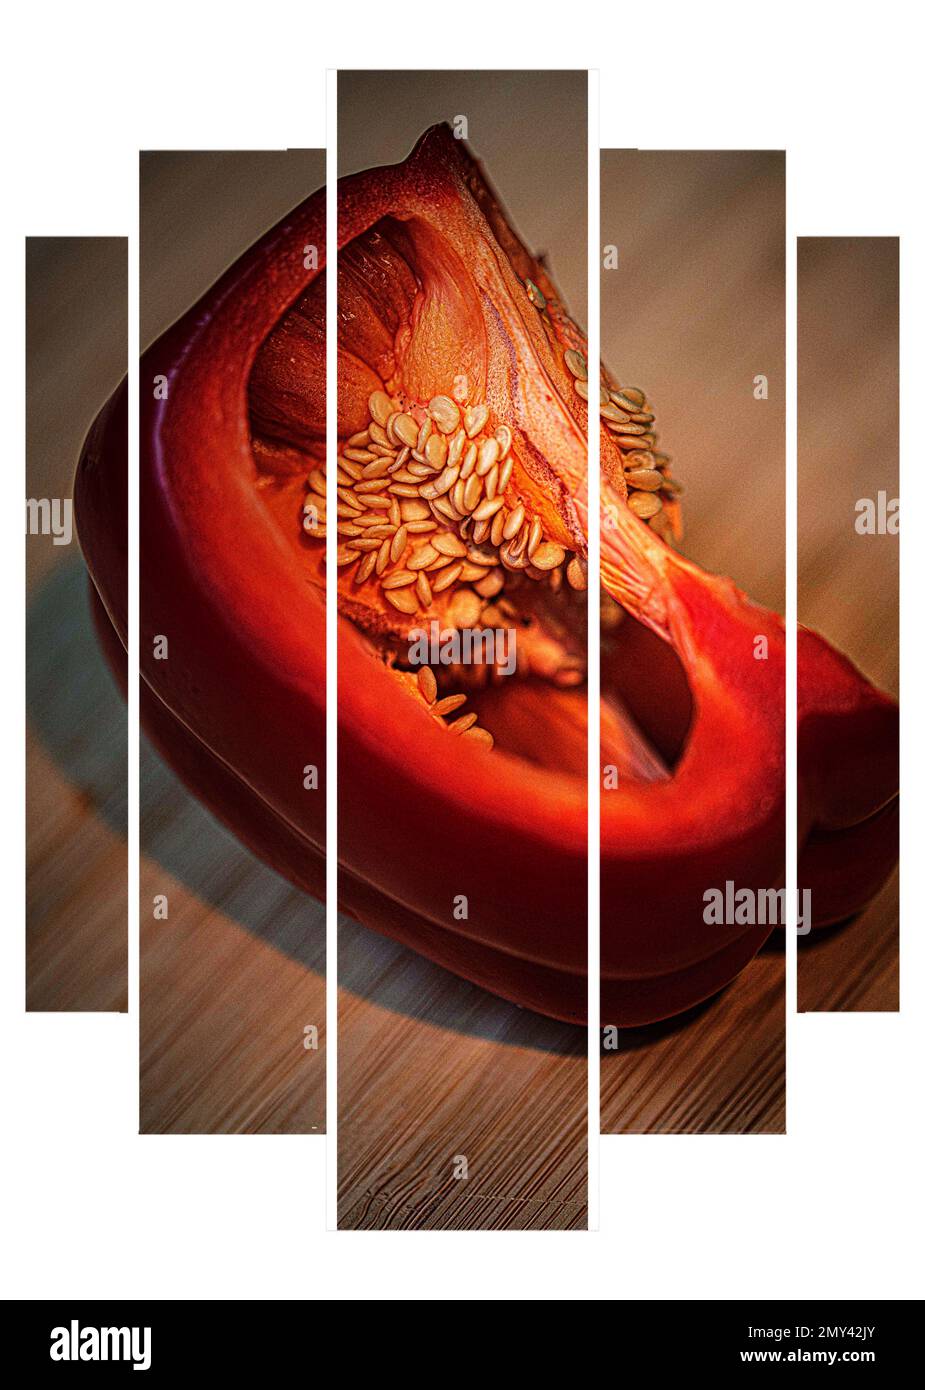 Photographs taken for wall art lovers a table top exercise in the Kitchen of food items on the chopping board Stock Photo